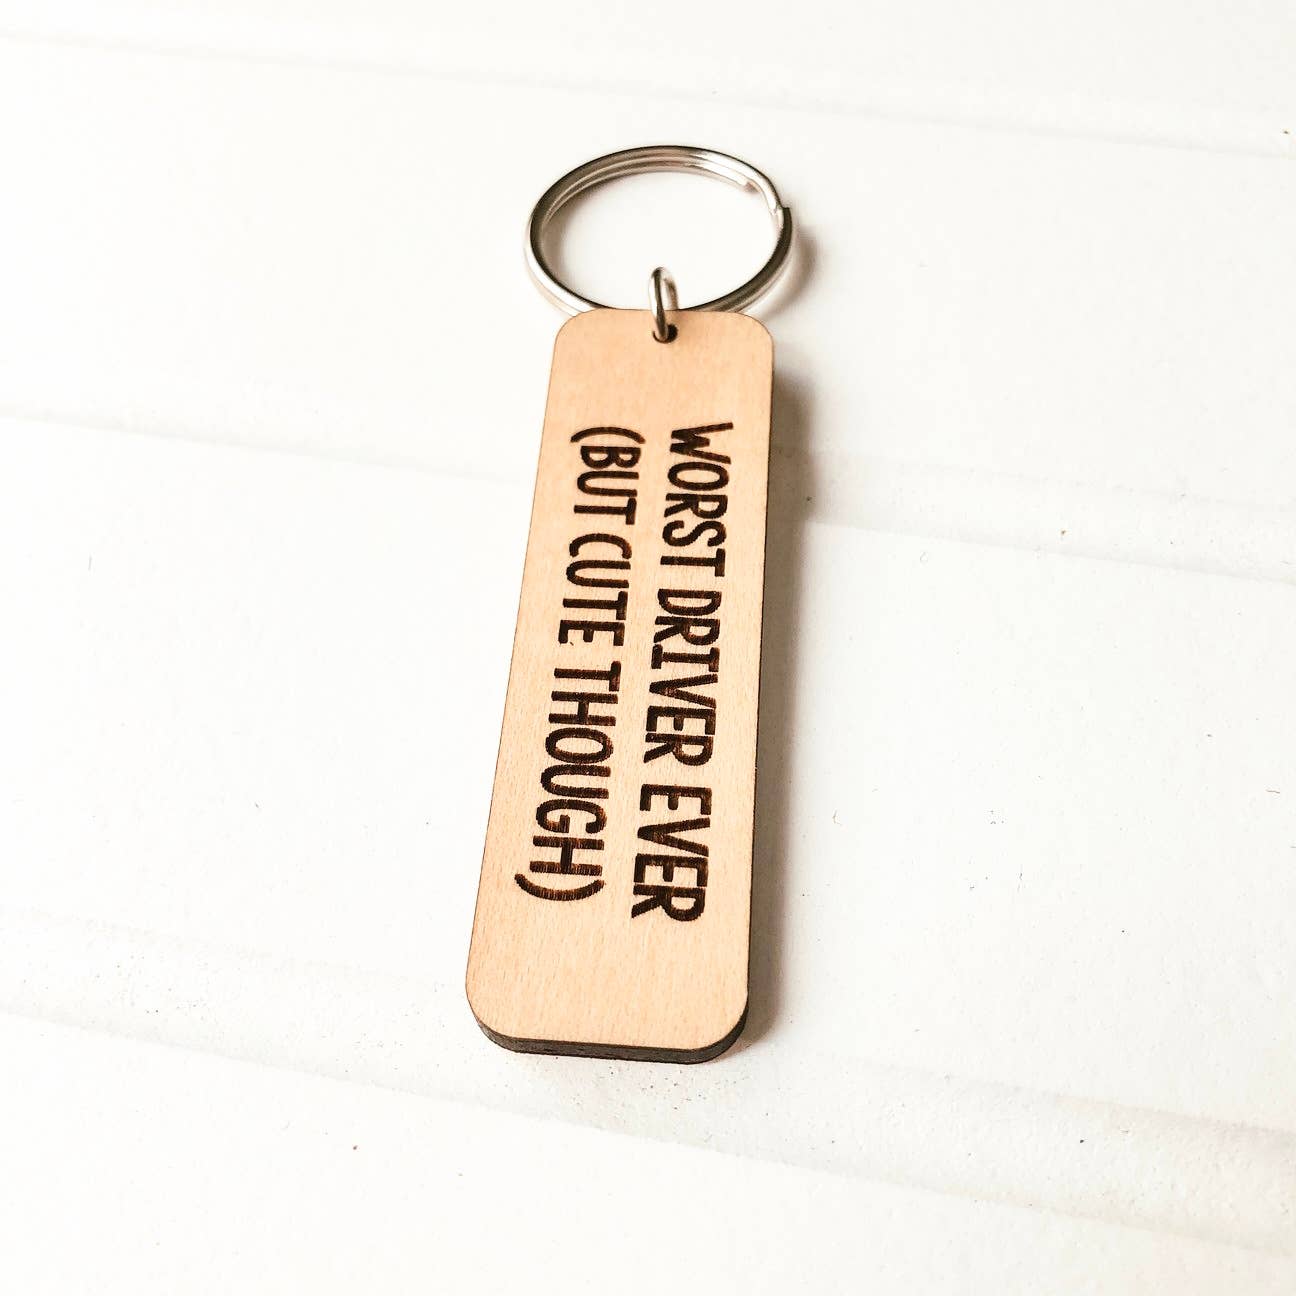 Knotty Design Co. | Worst Driver Ever But Cute Though Wooden Keychain